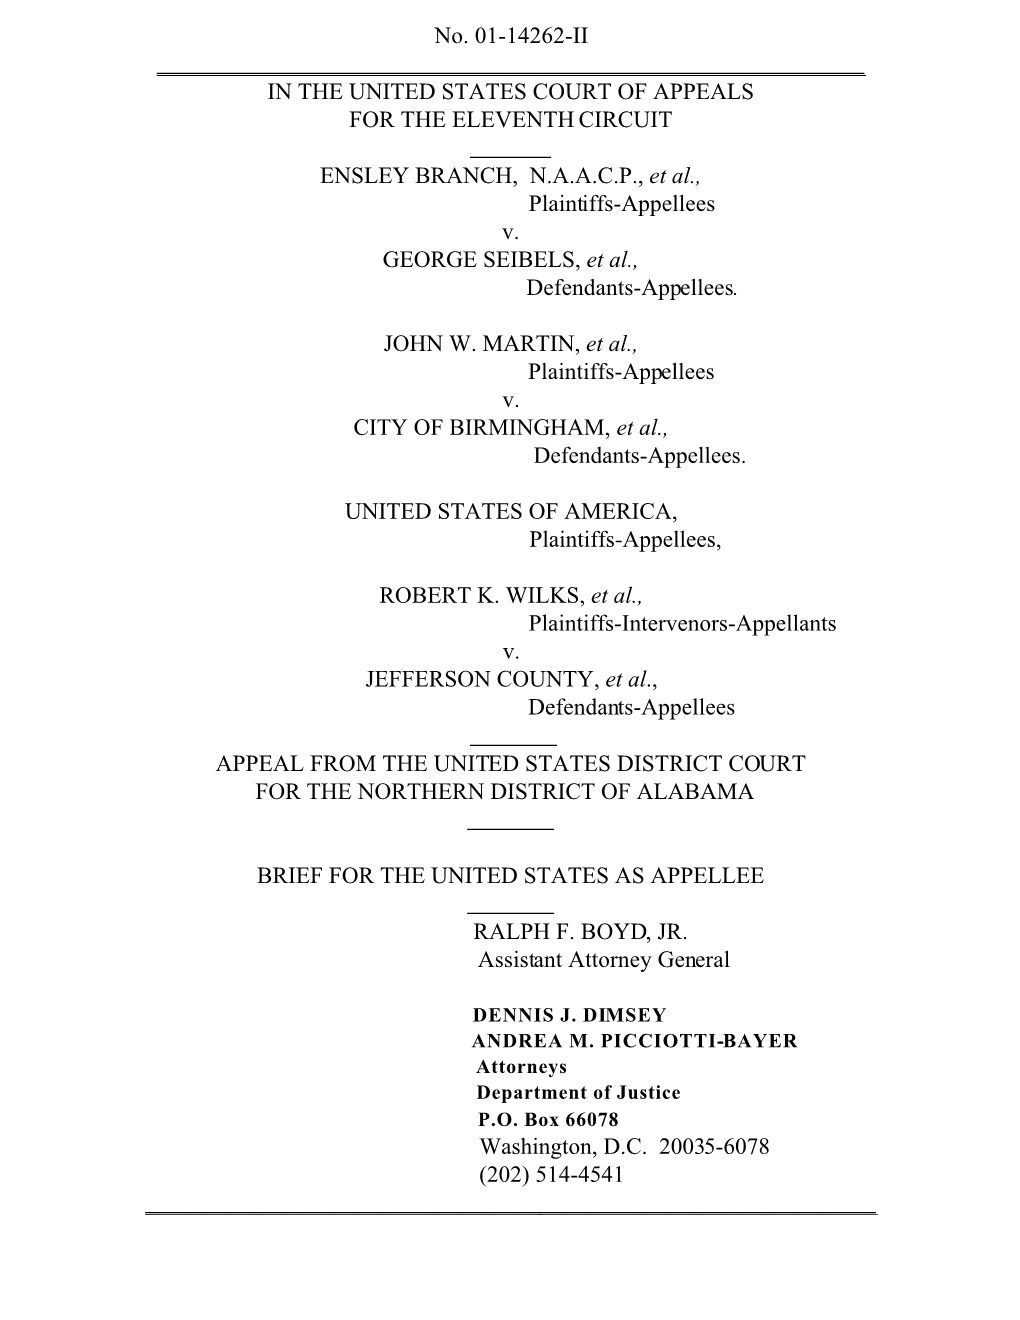 Ensley Branch, NAACP V. Seibels & Martin V. City of Birmingham, United States & Wilkes V. Jefferson County -- Brief As A